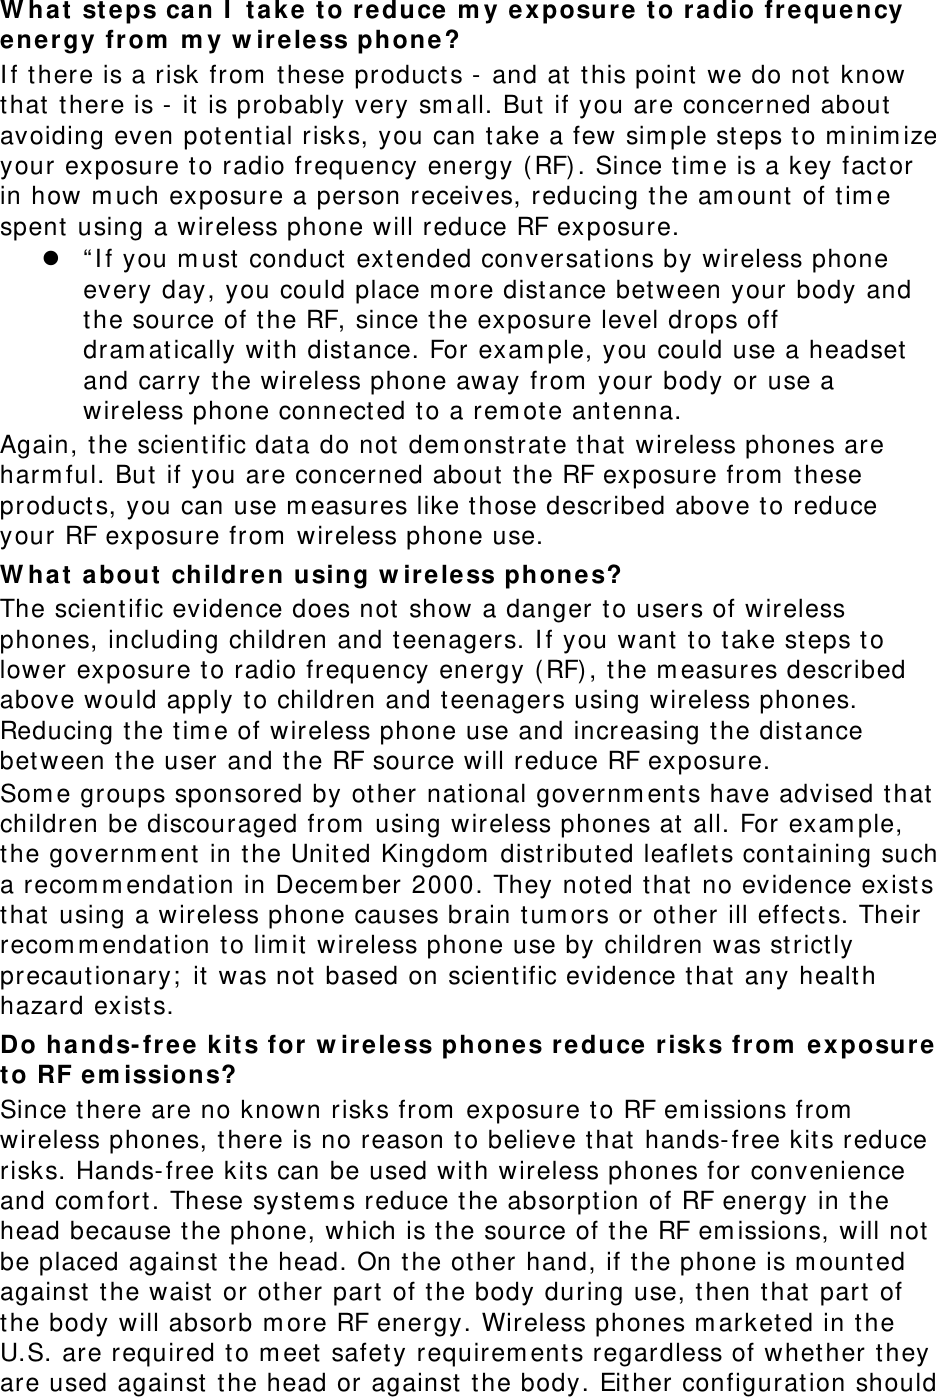 W hat  st eps ca n I  t ake t o reduce m y exposure  to radio frequency ene rgy fr om  m y w irele ss phone ? I f t here is a risk from  these products -  and at t his point we do not know that  t here is -  it is probably very sm all. But  if you are concerned about  avoiding even potent ial risks, you can t ake a few sim ple steps t o m inim ize your exposure t o radio frequency energy ( RF) . Since t im e is a key fact or in how m uch exposure a person receives, reducing the am ount  of t im e spent  using a wireless phone will reduce RF exposure. z “ I f you m ust  conduct  ext ended conversat ions by wireless phone every day, you could place m ore dist ance bet ween your body and the source of t he RF, since t he exposure level drops off dram atically wit h distance. For exam ple, you could use a headset and carry the wireless phone away from  your body or use a wireless phone connect ed to a rem ote ant enna. Again, t he scient ific data do not dem onstrate t hat wireless phones are harm ful. But  if you are concerned about  t he RF exposure from  t hese product s, you can use m easures like those described above to reduce your RF exposure from  wireless phone use. W hat  about  ch ildren using w irele ss ph ones? The scient ific evidence does not show a danger to users of wireless phones, including children and teenagers. I f you want  t o t ake steps t o lower exposure to radio frequency energy ( RF), t he m easures described above would apply to children and t eenagers using wireless phones. Reducing the t im e of wireless phone use and increasing t he dist ance bet ween the user and t he RF source will reduce RF exposure. Som e groups sponsored by other national governm ents have advised t hat children be discouraged from  using wireless phones at all. For exam ple, the governm ent  in the United Kingdom  dist ribut ed leaflets containing such a recom m endation in Decem ber 2000. They not ed t hat  no evidence exists that  using a wireless phone causes brain t um ors or other ill effect s. Their recom m endation t o lim it wireless phone use by children was strictly precautionary;  it was not  based on scient ific evidence that  any health hazard exists.   Do ha nds- fr ee  kits for  w ireless phones re duce  risks from  e xposure t o RF e m issions? Since there are no known risks from  exposure t o RF em issions from  wireless phones, there is no reason t o believe t hat hands- free kit s reduce risks. Hands- free kit s can be used with wireless phones for convenience and com fort . These system s reduce t he absorption of RF energy in t he head because t he phone, which is t he source of t he RF em issions, will not be placed against the head. On t he other hand, if t he phone is m ount ed against the waist  or other part of t he body during use, t hen t hat part of the body will absorb m ore RF energy. Wireless phones m arketed in the U.S. are required t o m eet  safety requirem ents regardless of whet her t hey are used against the head or against the body. Eit her configuration should 